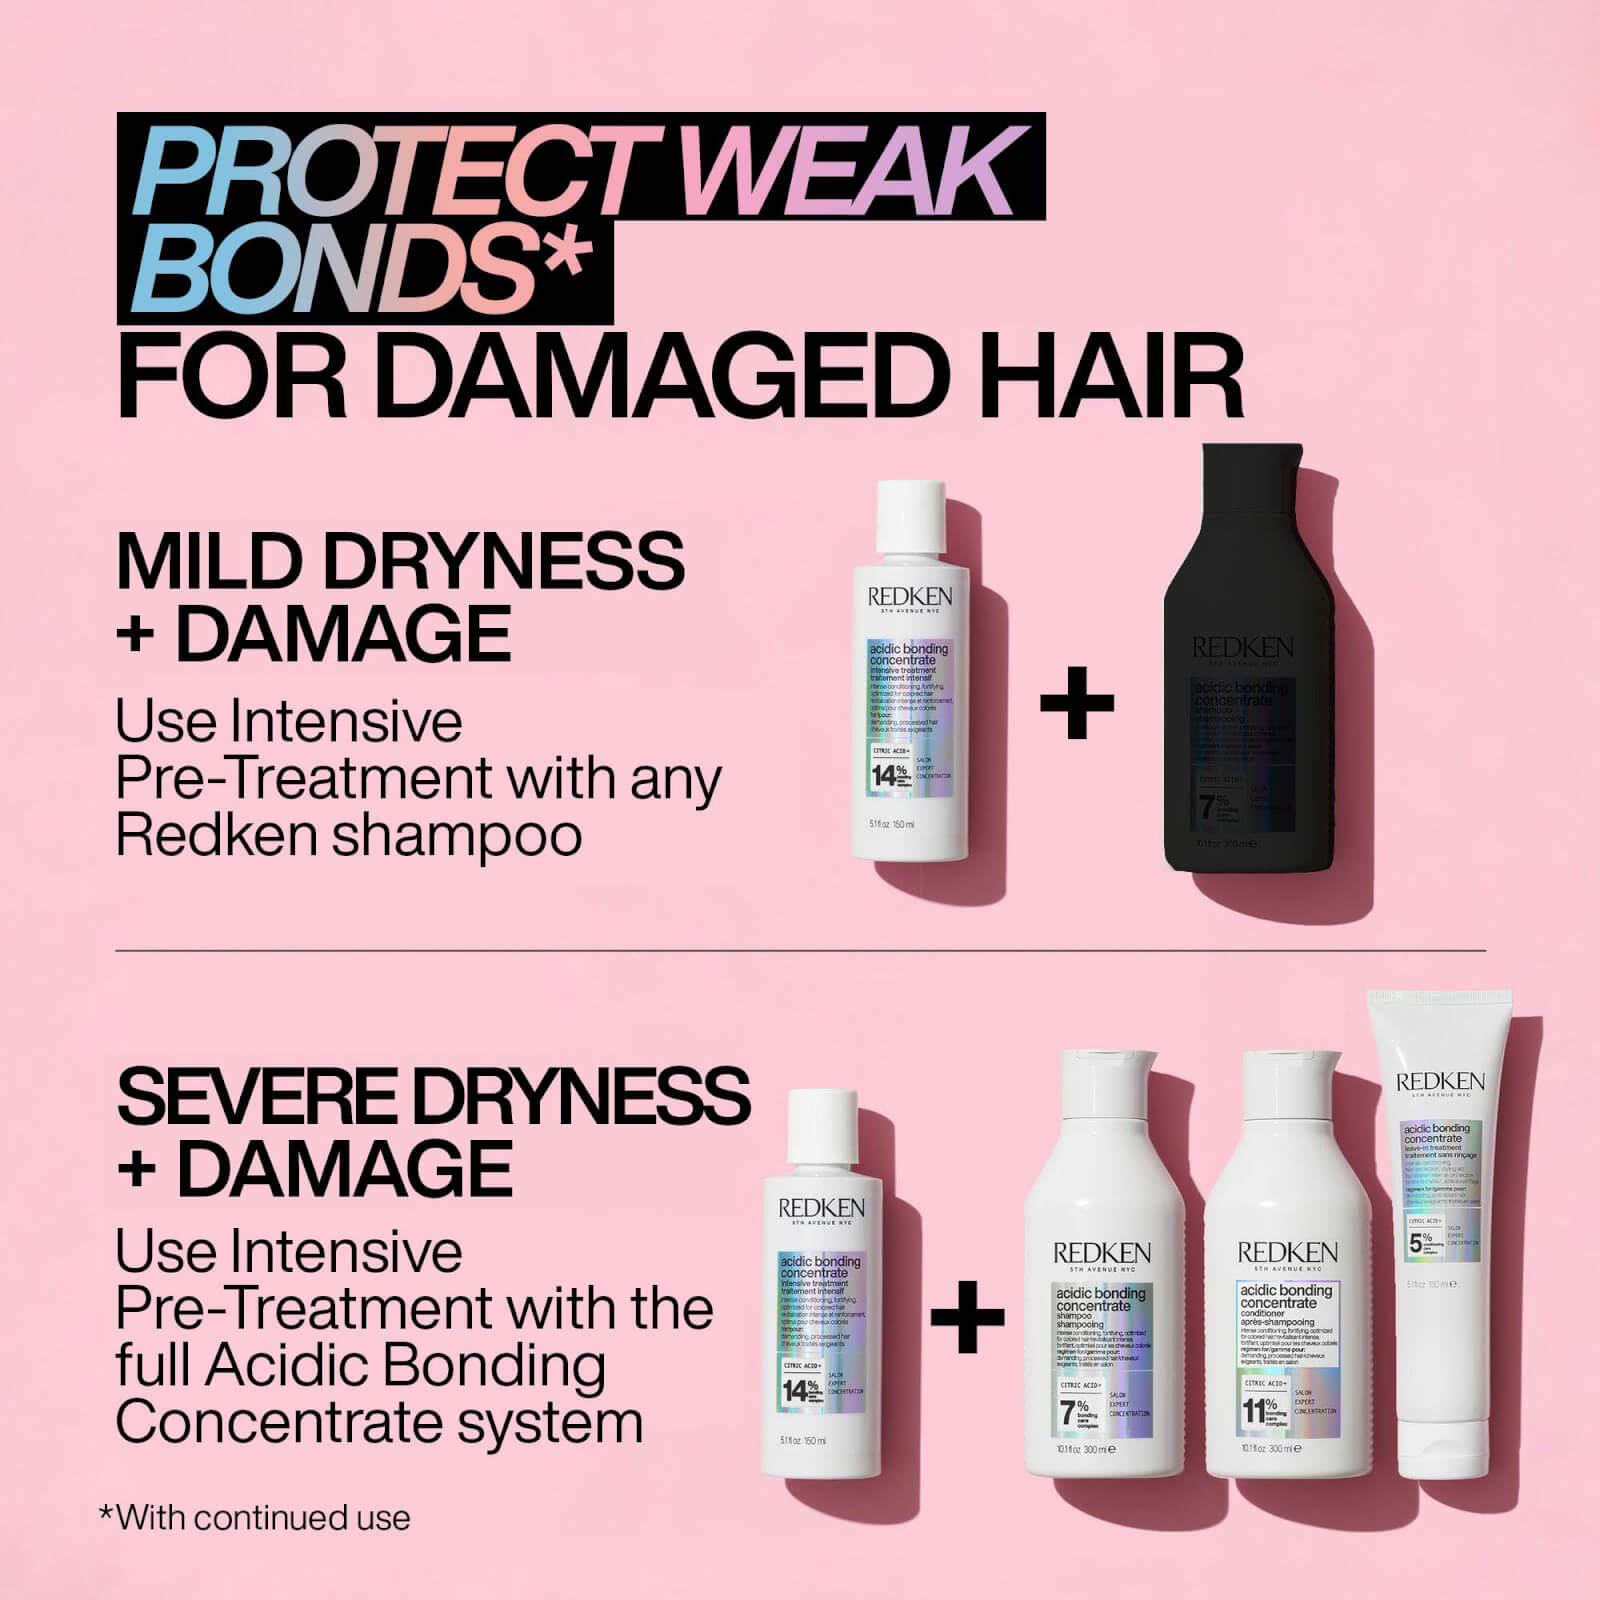 Image of Redken Acidic Bonding Concentrate Intensive Pre-Treatment, Shampoo, Conditioner and Leave-in Treatment Bond Repair Bundle